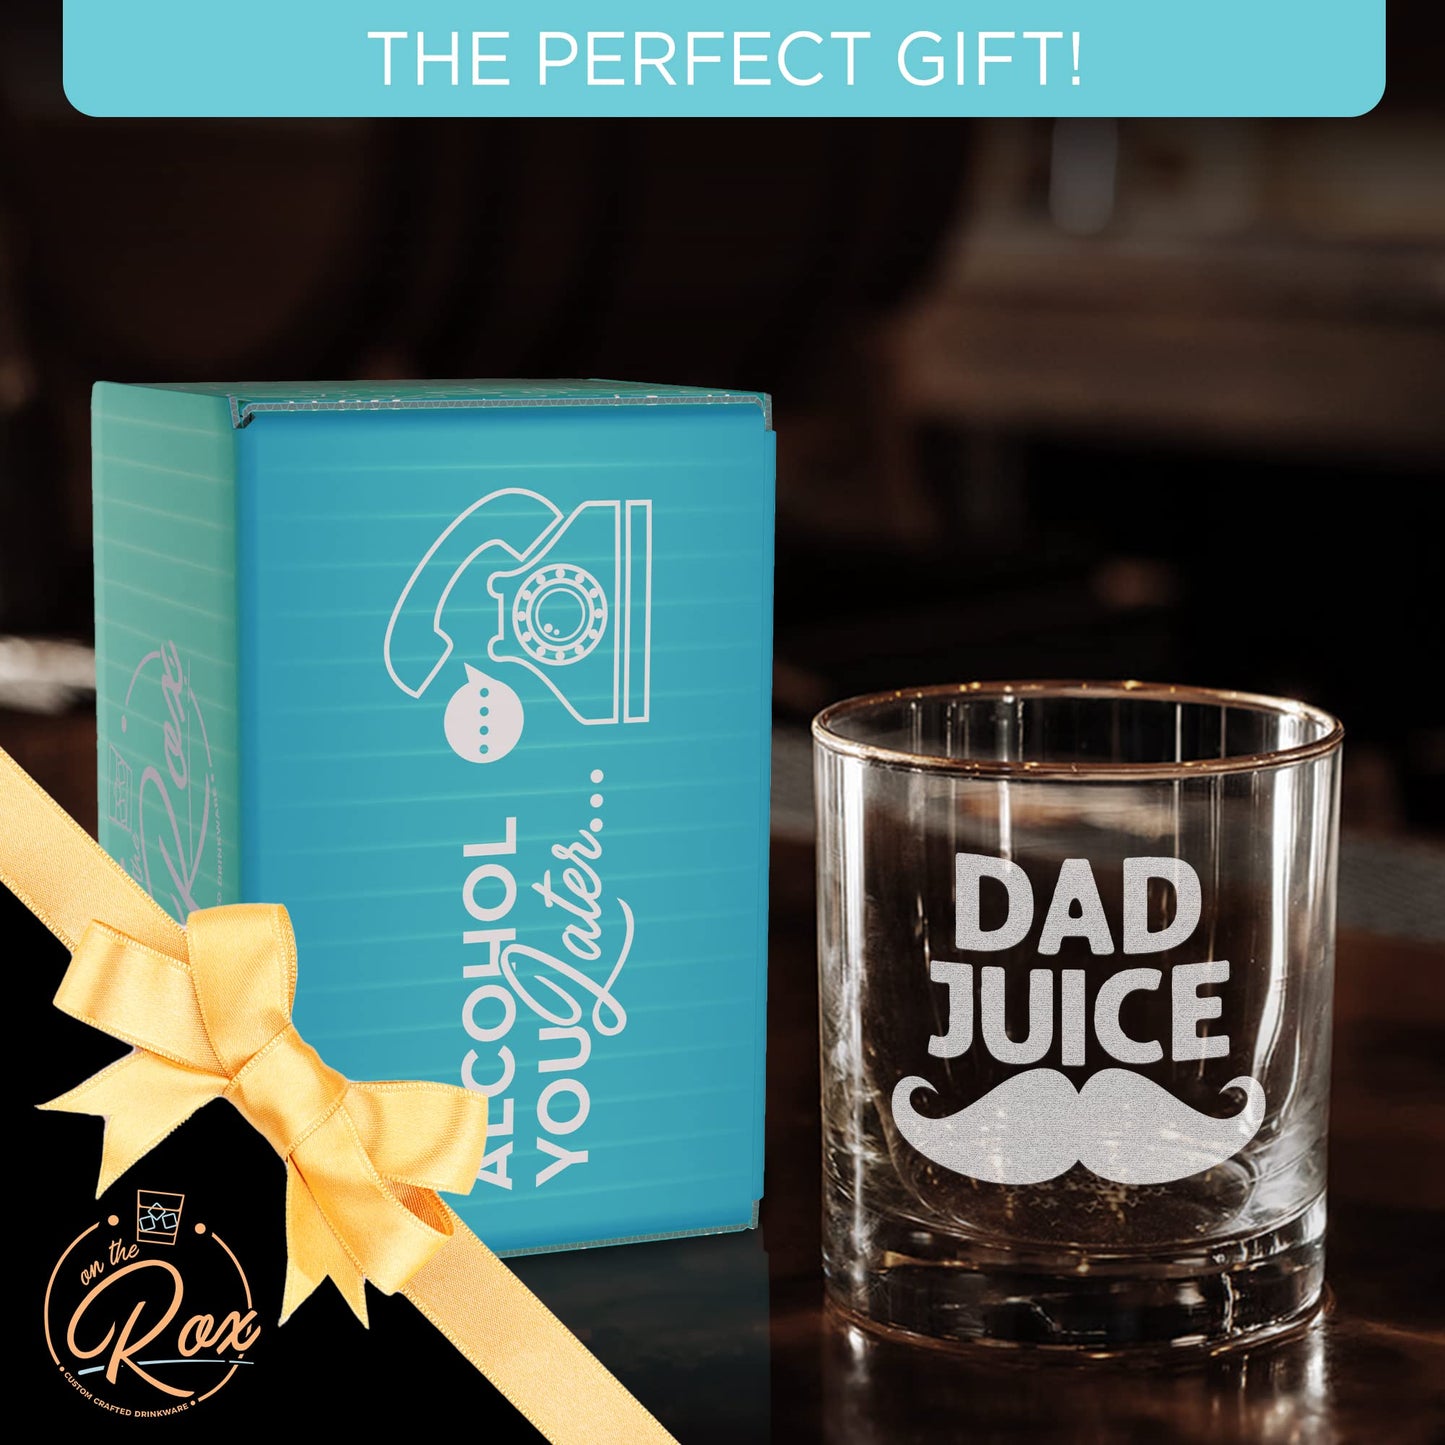 Whiskey Gifts for Dad- 11 Oz "Dad Juice" Engraved Whiskey Glass - Father's Day Gift, Dad Birthday Gifts From Daughter, Wife or Son - Dad Bourbon Glass - Old Fashion Glass - 6 Designs To Choose From